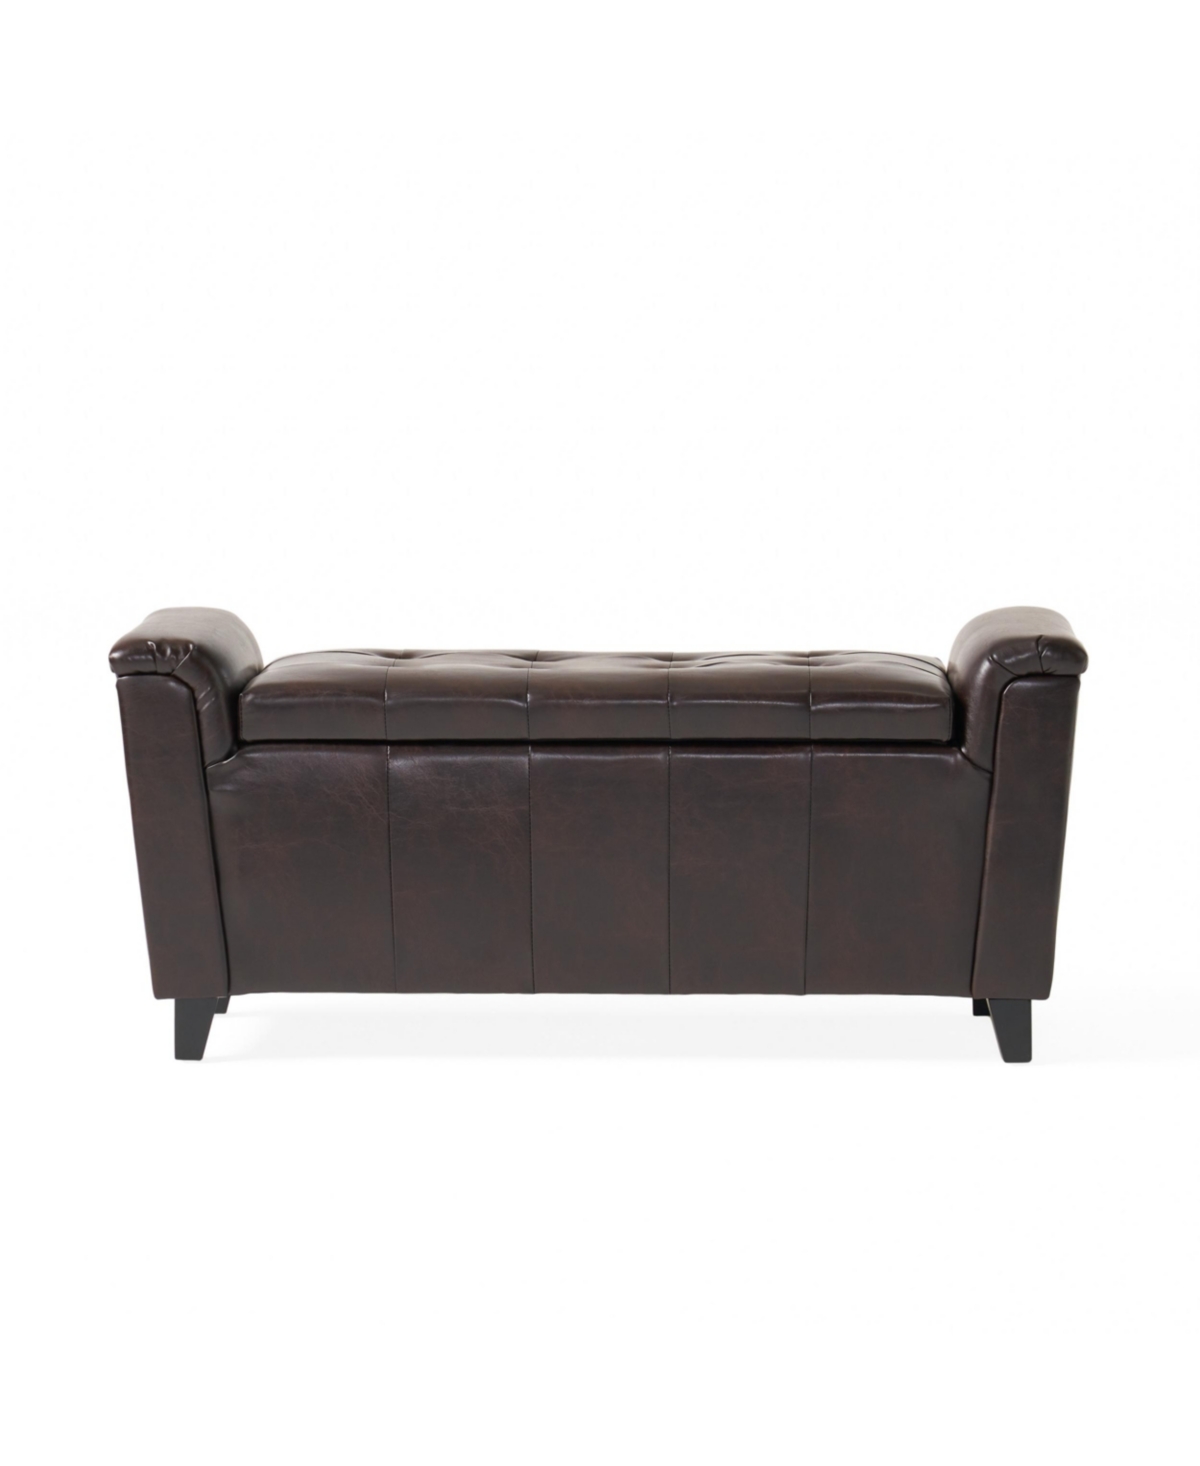 Noble House Alden Armed Storage Bench In Brown